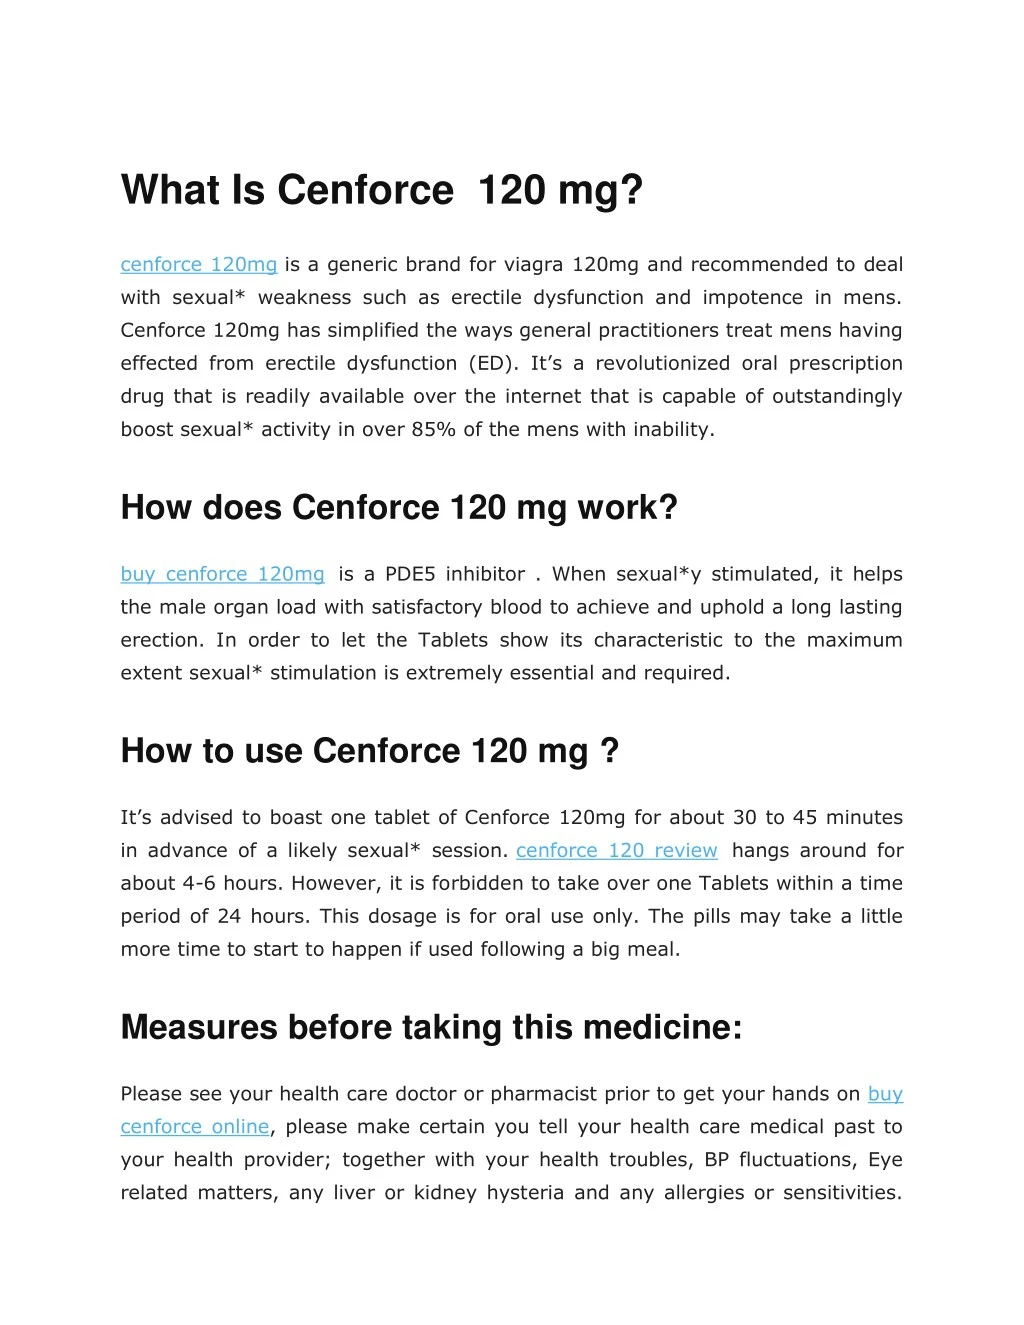 what is cenforce 120 mg